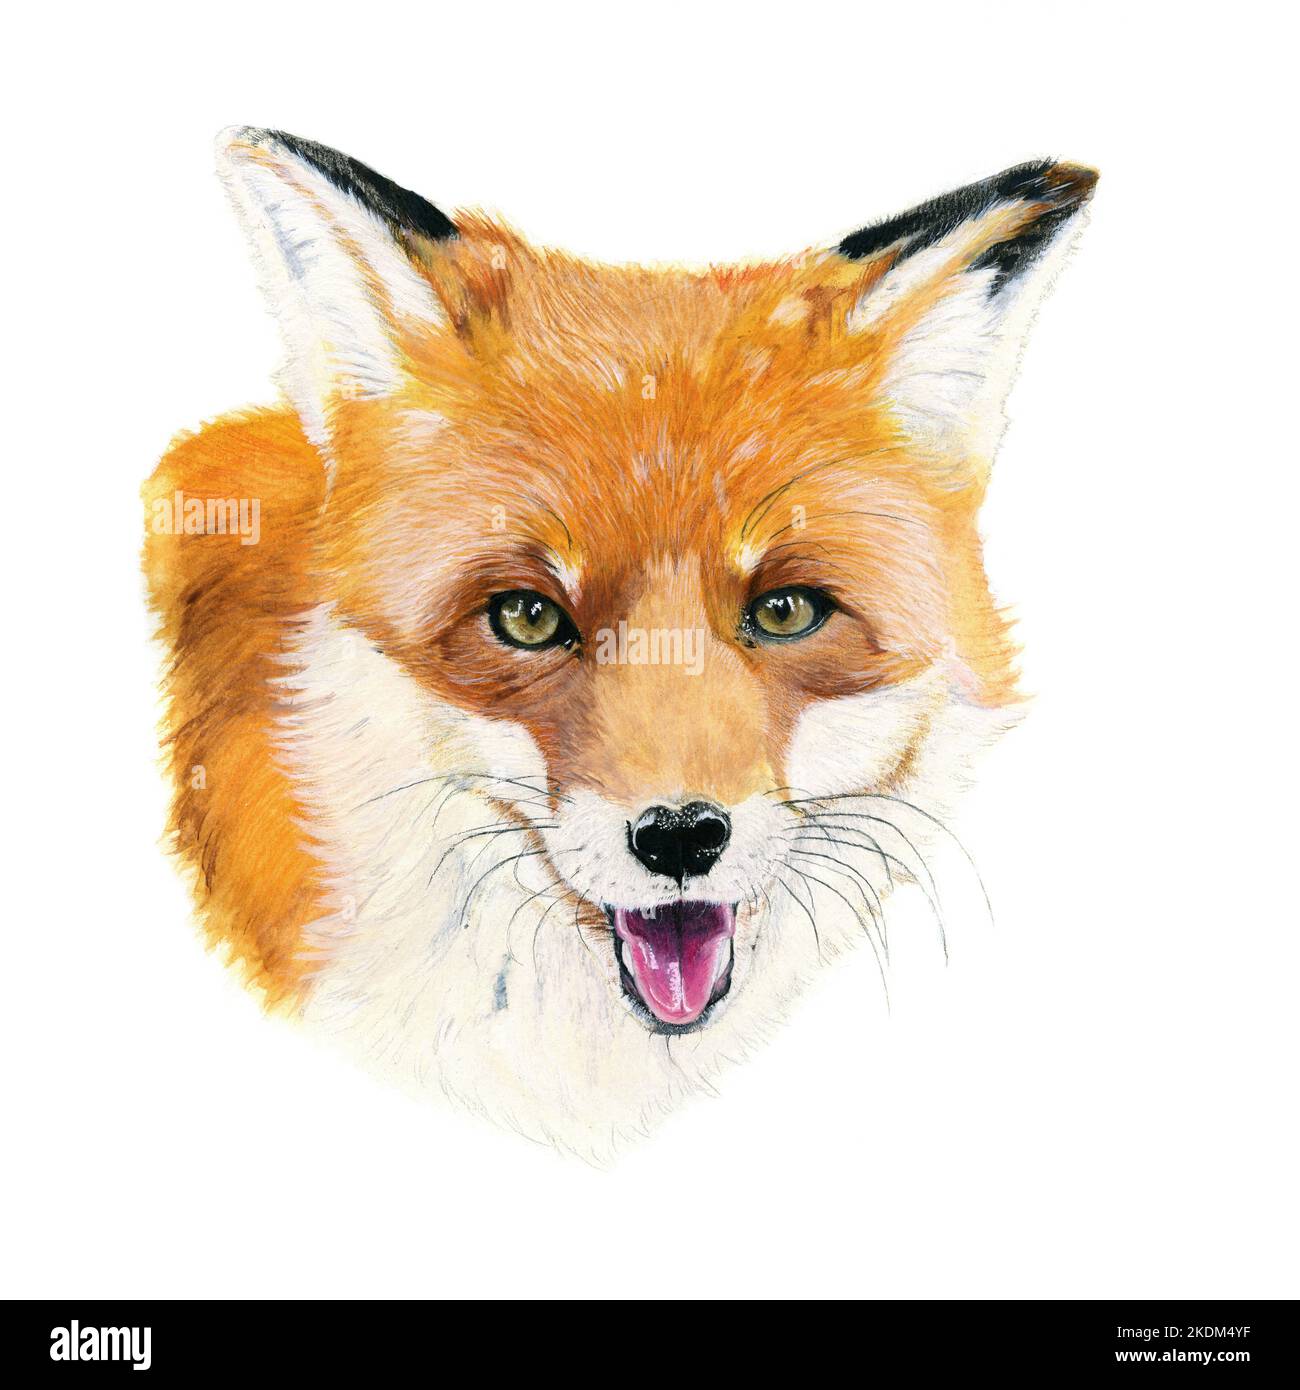 Red fox drawn in watercolor. Illustration of portrait on a white background Stock Photo